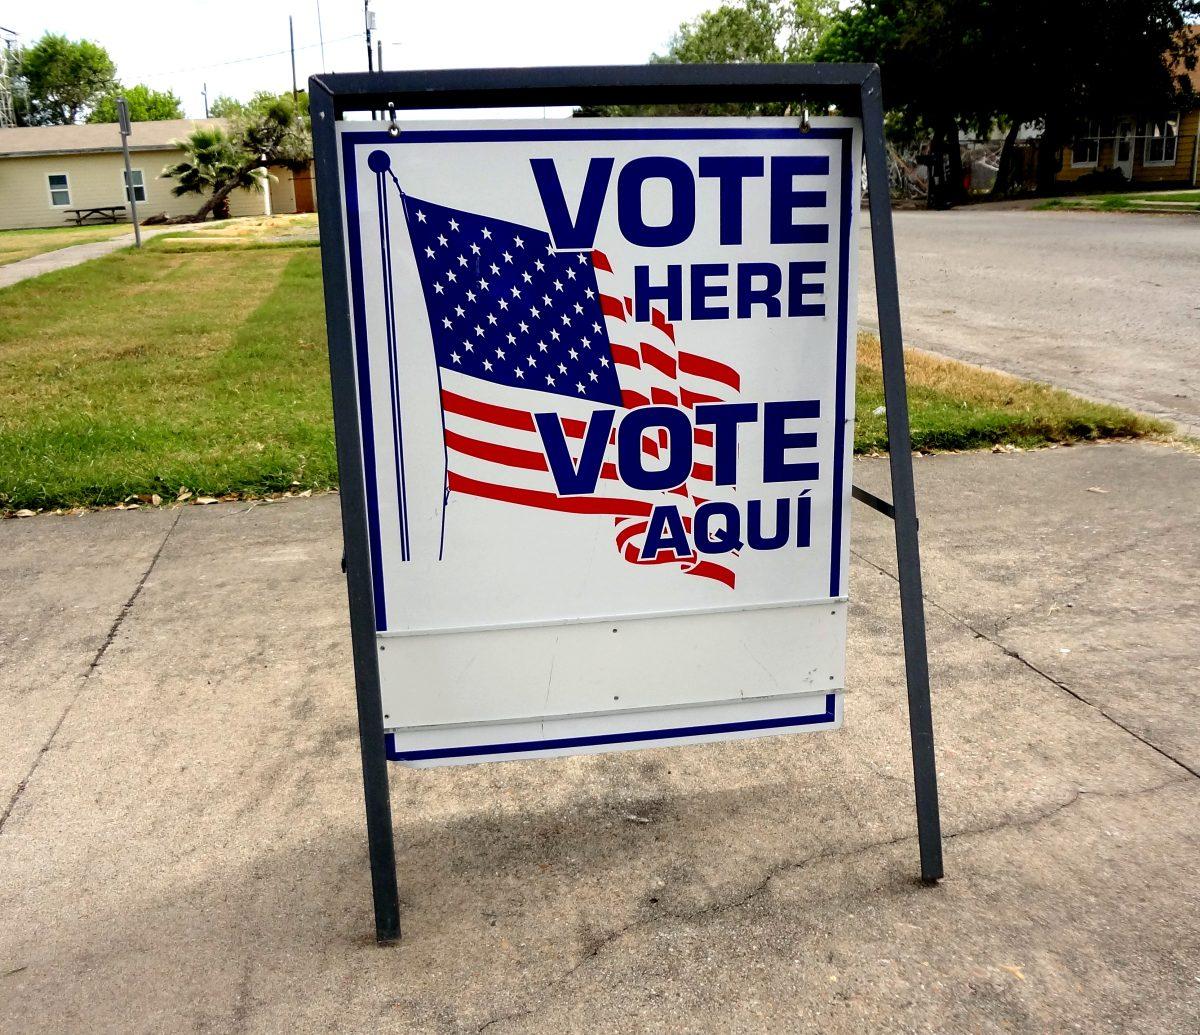  Opinion columnist Kaelin Connor says the results of the Texas Primary could be swinging,